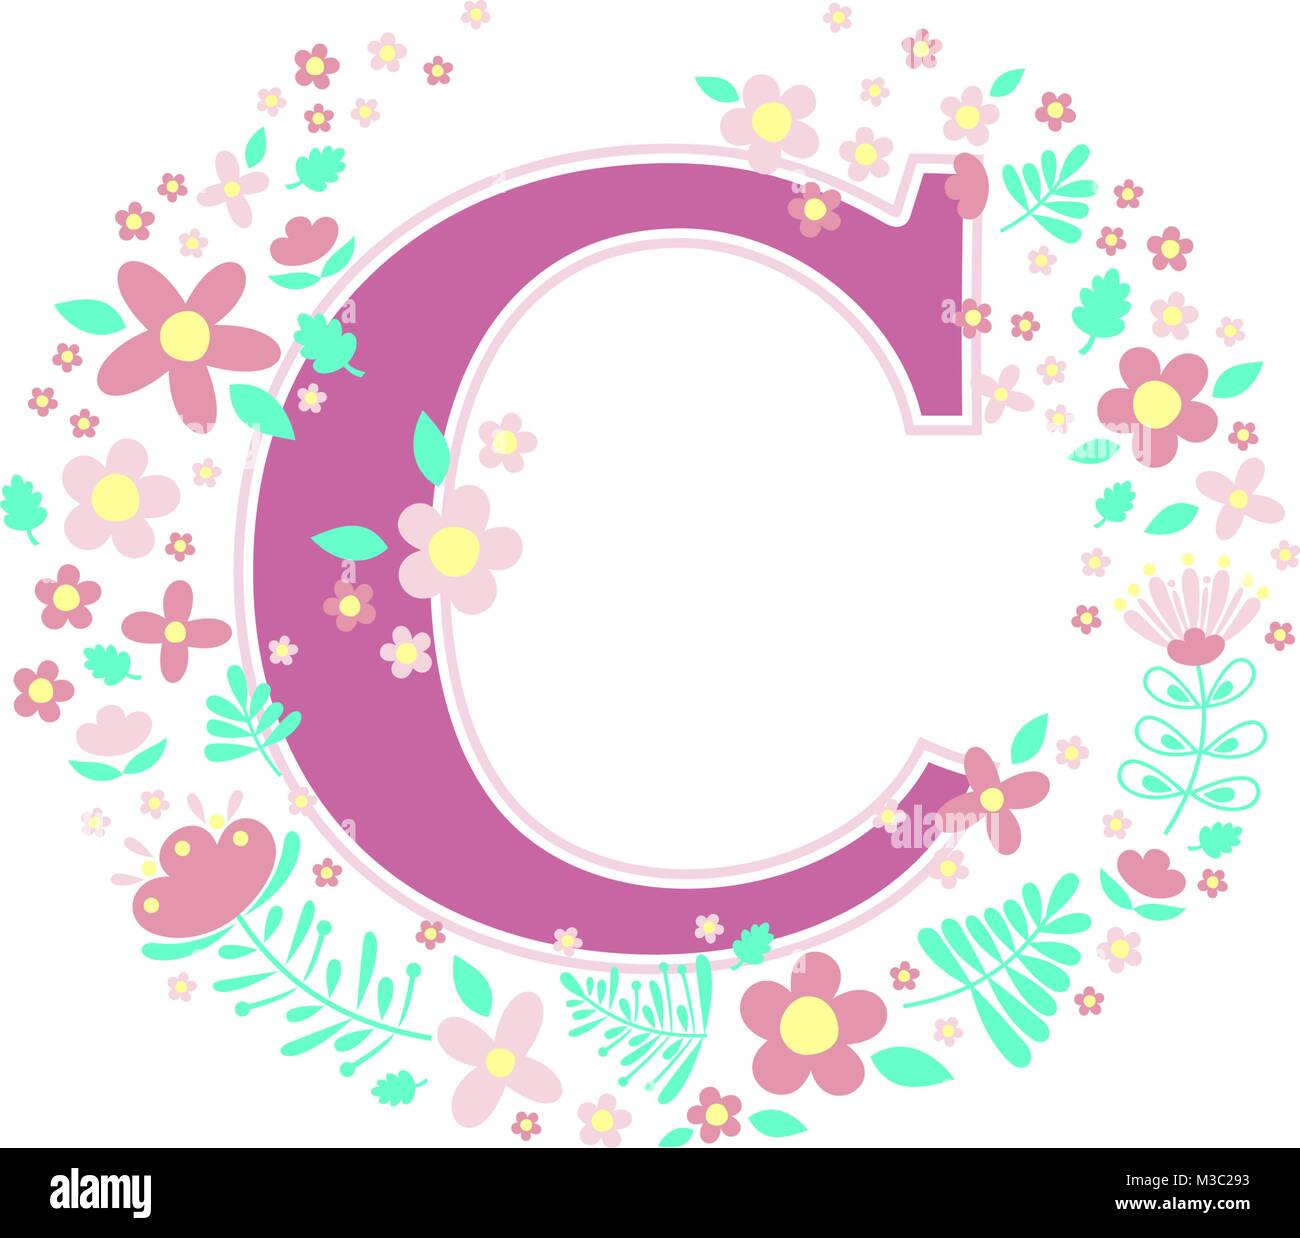 initial letter c with decorative flowers and design elements isolated on white background. can be used for baby name, nursery decoration, spring theme Stock Vector